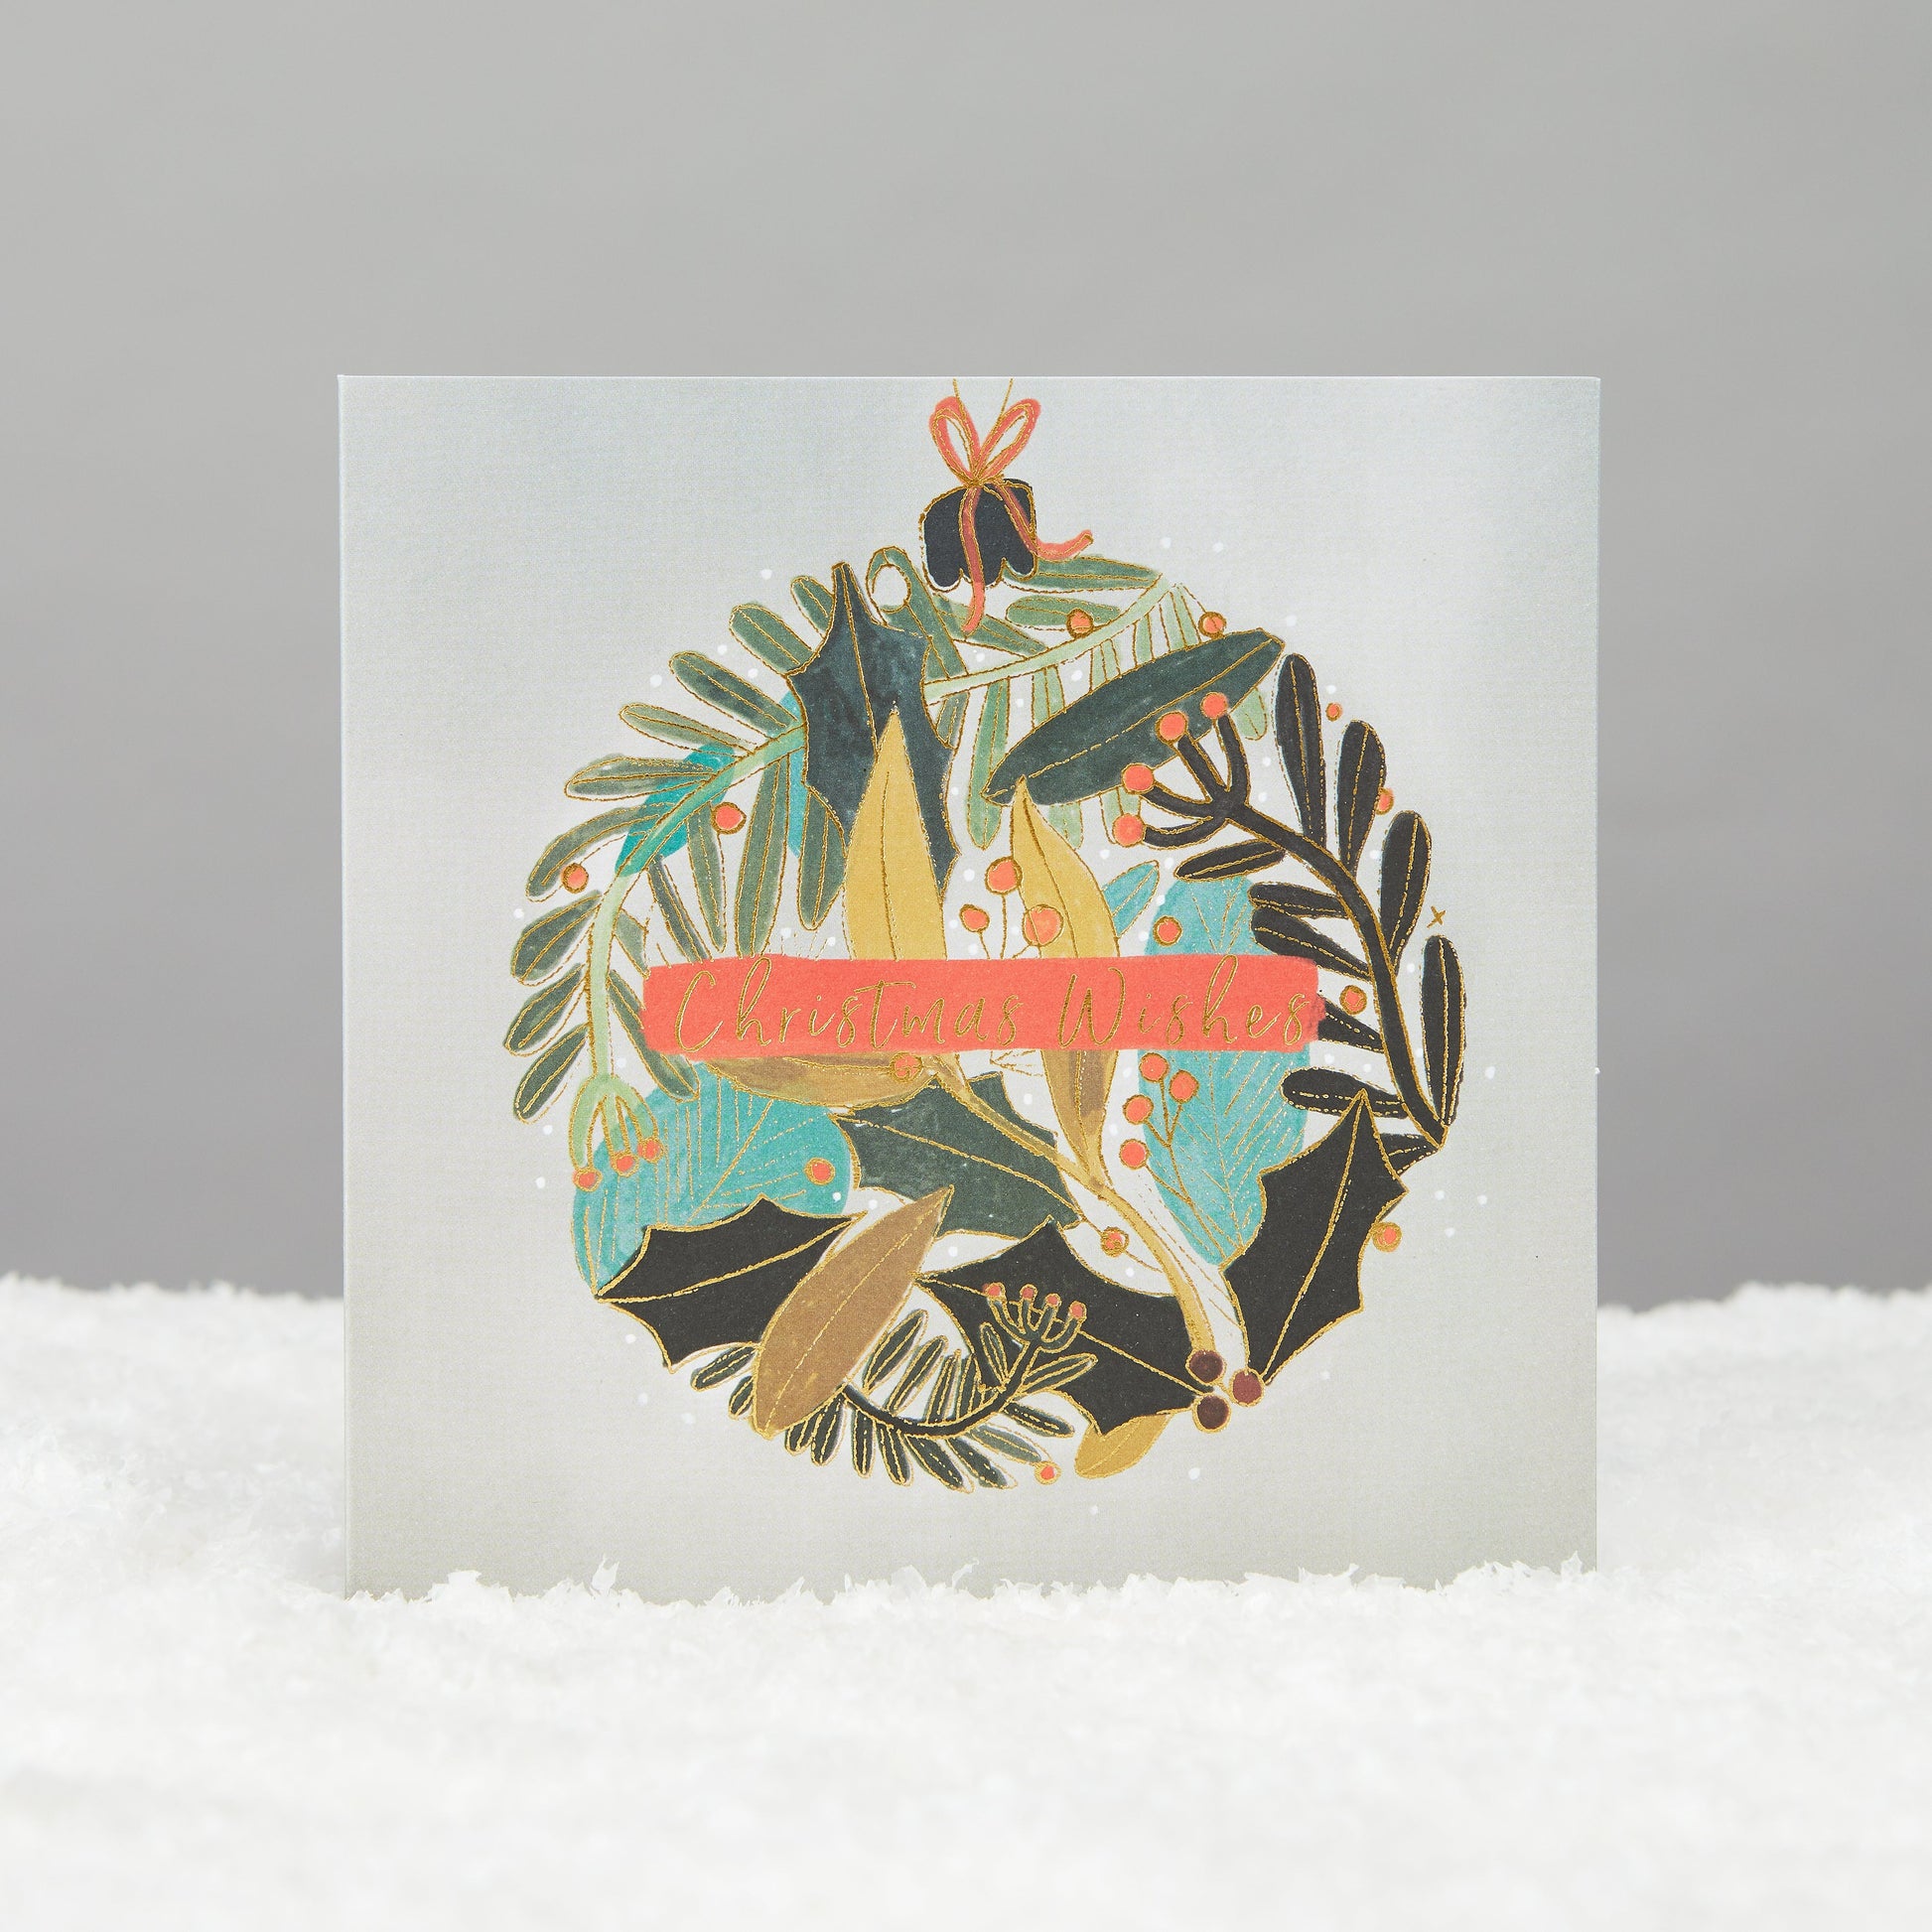 Square card with Christmas bauble decorated with foliage